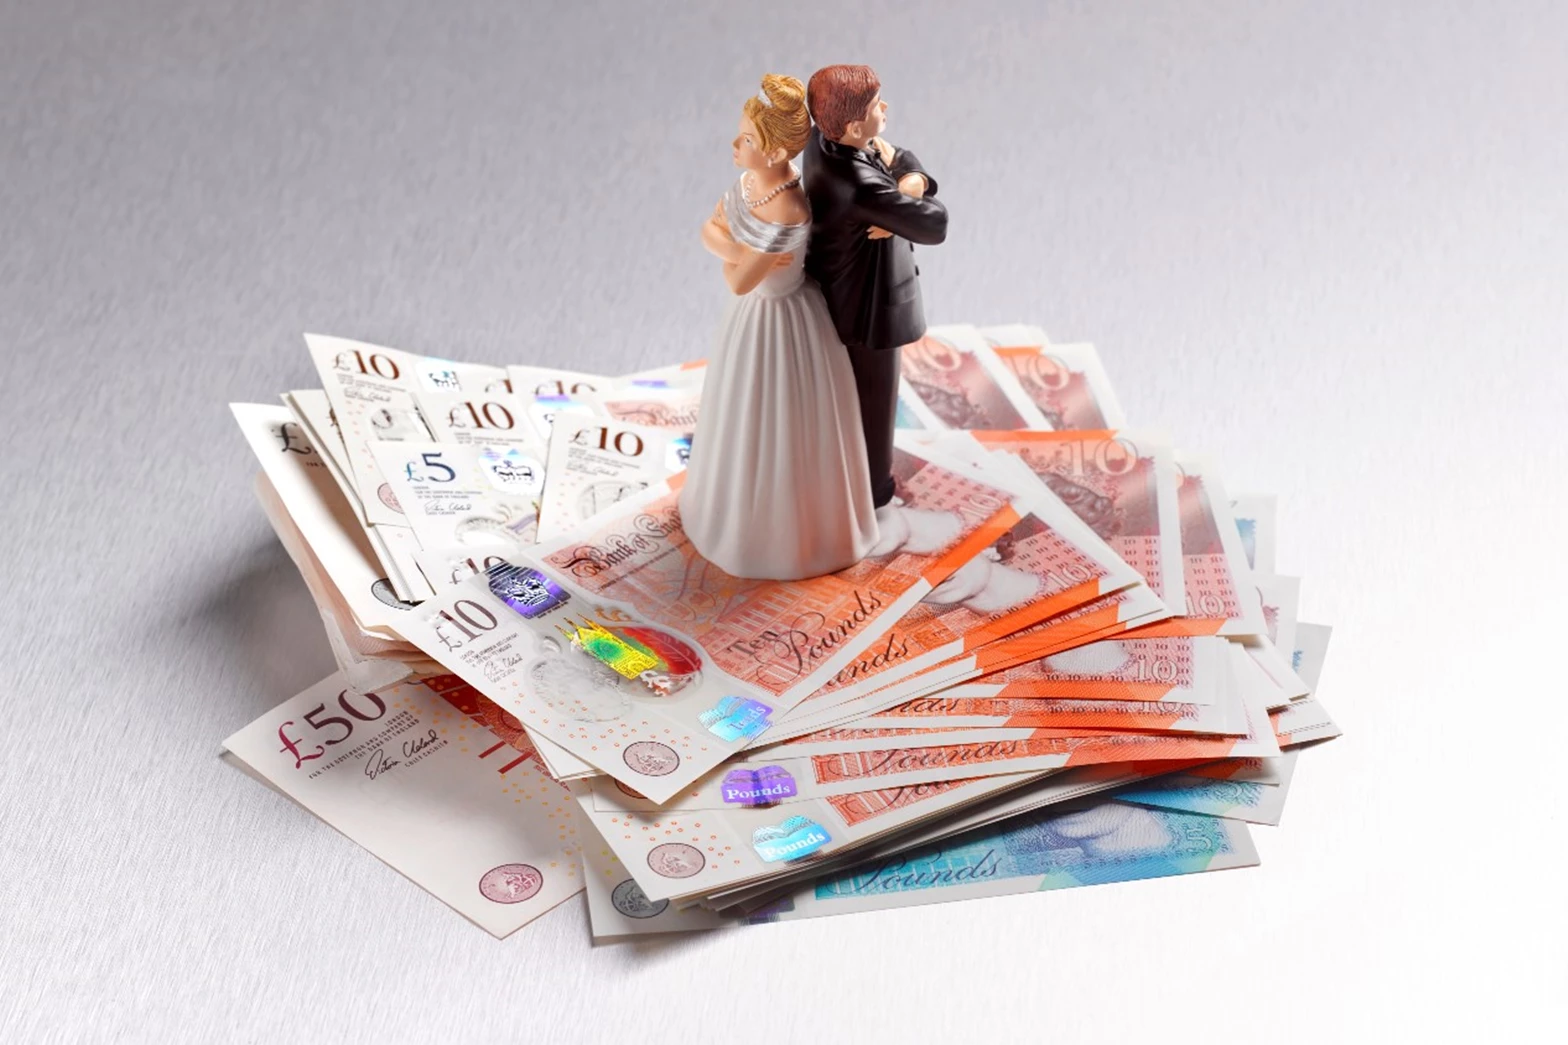 A wedding cake topper of a bride and groom, with backs turned and arms crossed, sits on top of a pile of bank notes